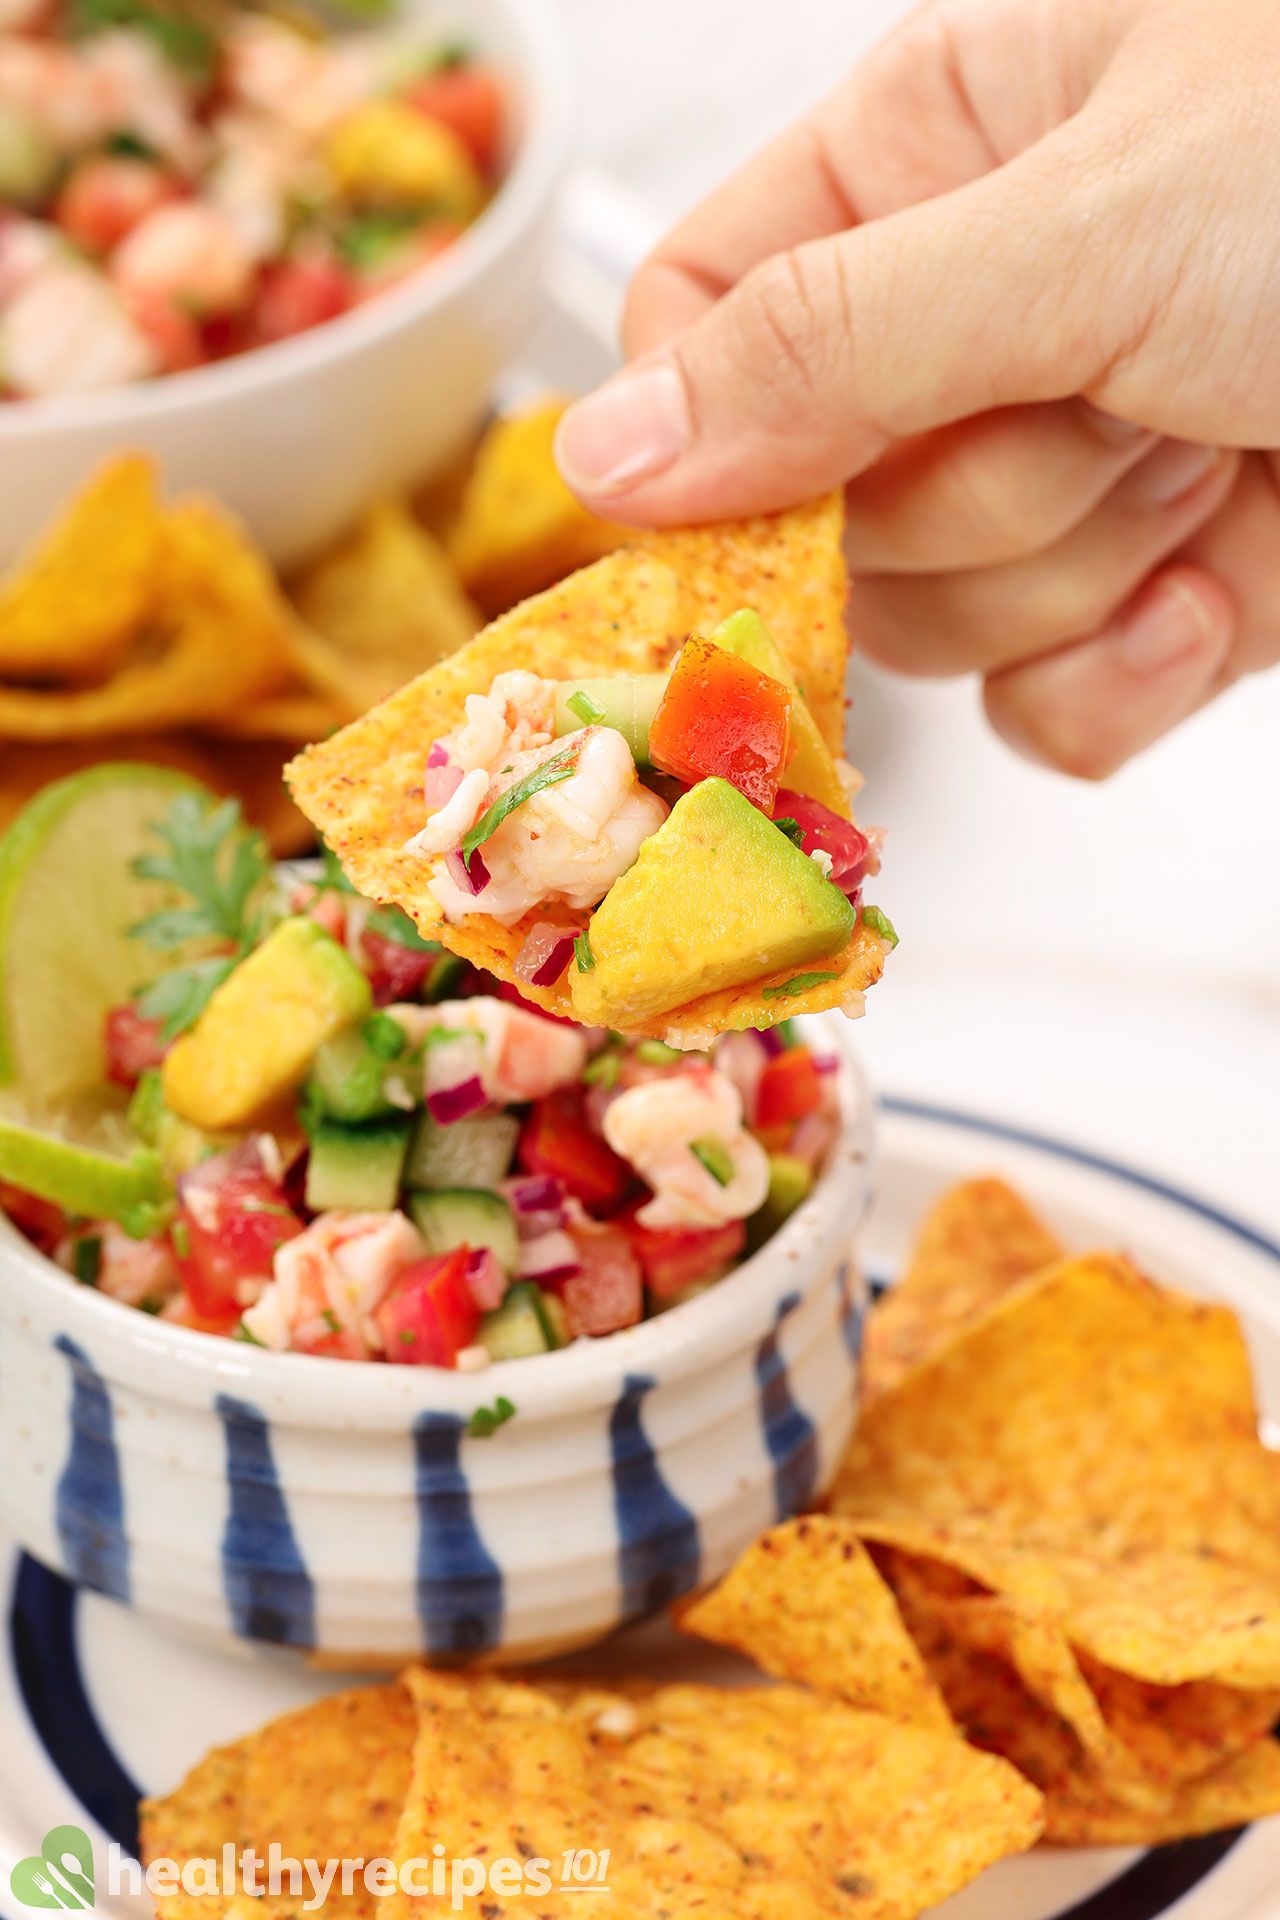 Is Shrimp Ceviche Healthy